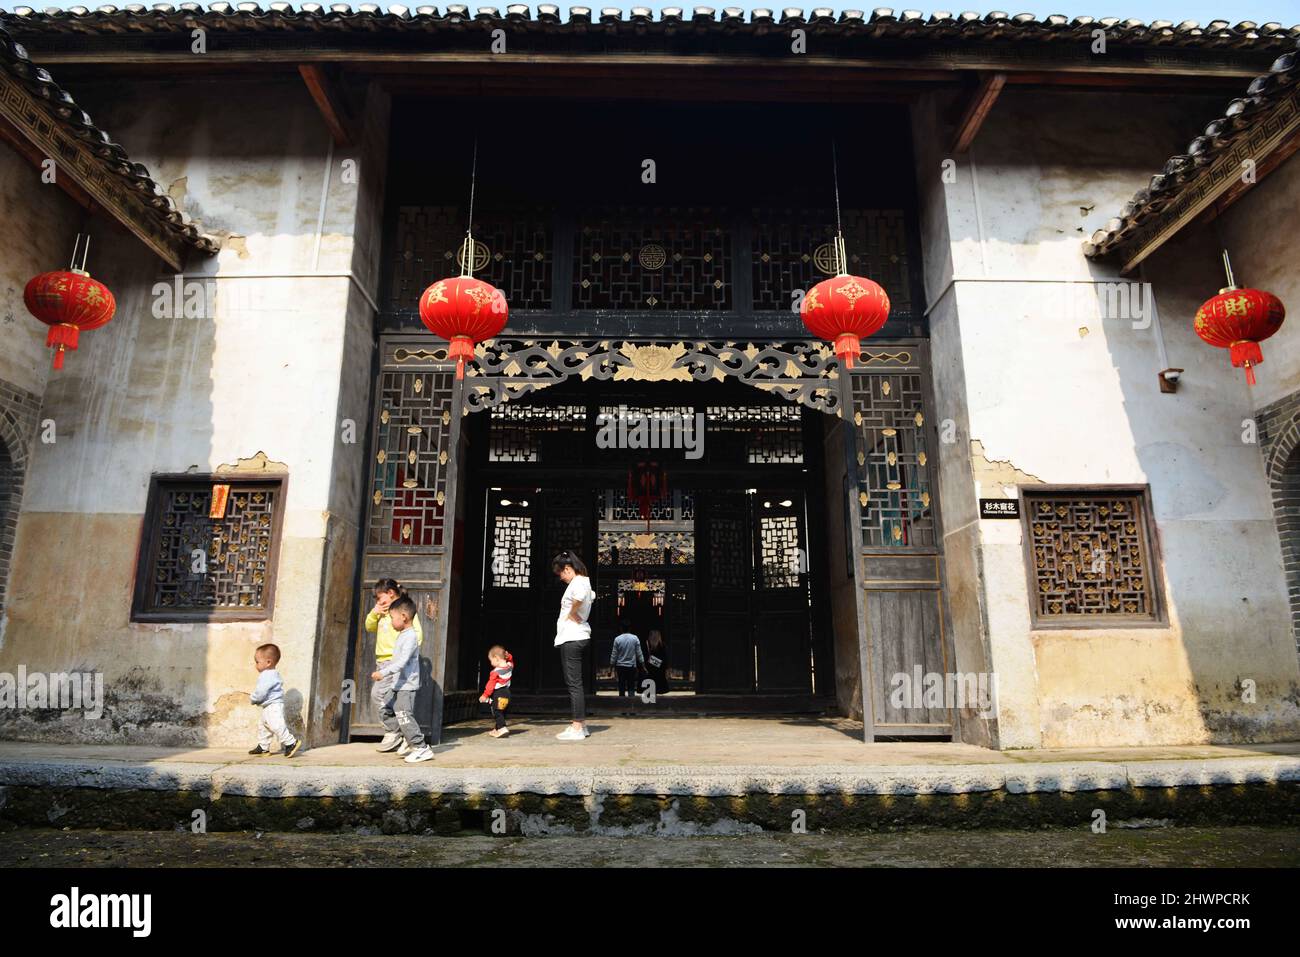 March 7, 2022, Hezhou, Hezhou, China: On March 5, in Rinchong Village, Liantang Town, Babu District, Hezhou City, friends played in a Hakka Round House...Jiang's ancestral house, located in Rinchong Village, Liantang Town, Babu District, Hezhou City, Guangxi Province, was built in the Qing Dynasty and has a history of more than 200 years. It is a typical Hakka Round House in East Guizhou. The Round House covers an area of more than 30 acres. The building is a square symmetrical structure, surrounded by a 3-meter-high wall and separated from the outside world. The layout of the buildings, halls Stock Photo